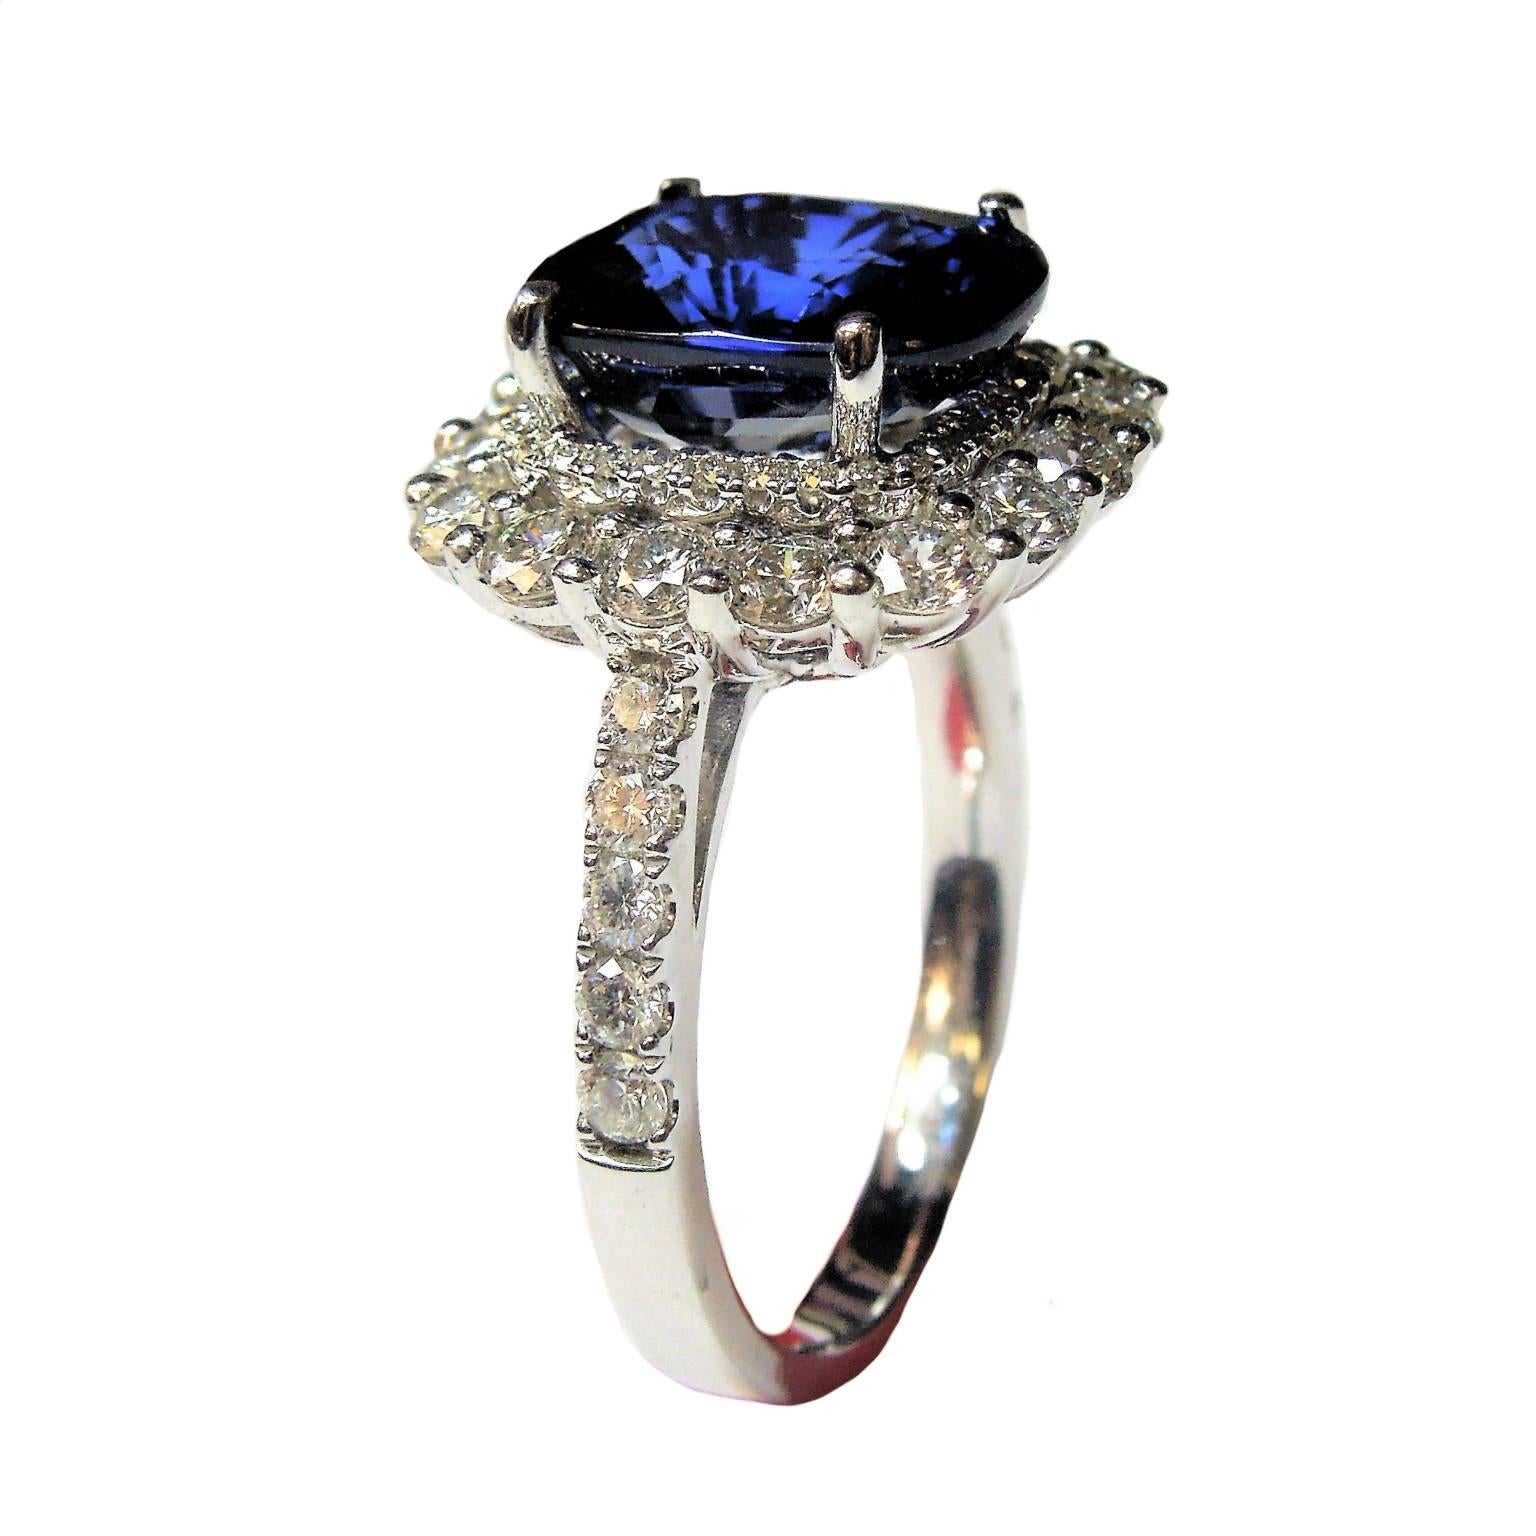 AGL Certified 5.02 Cushion Cut Blue Sapphire Ring with Diamonds

Apprx. 5.50ct. VVS Diamonds

Certificate states Cushion Cut Blue Sapphire is from Madagascar and has no enhancements. Does have heat treatment.

Face 0.6 inch. 0.1 inch band